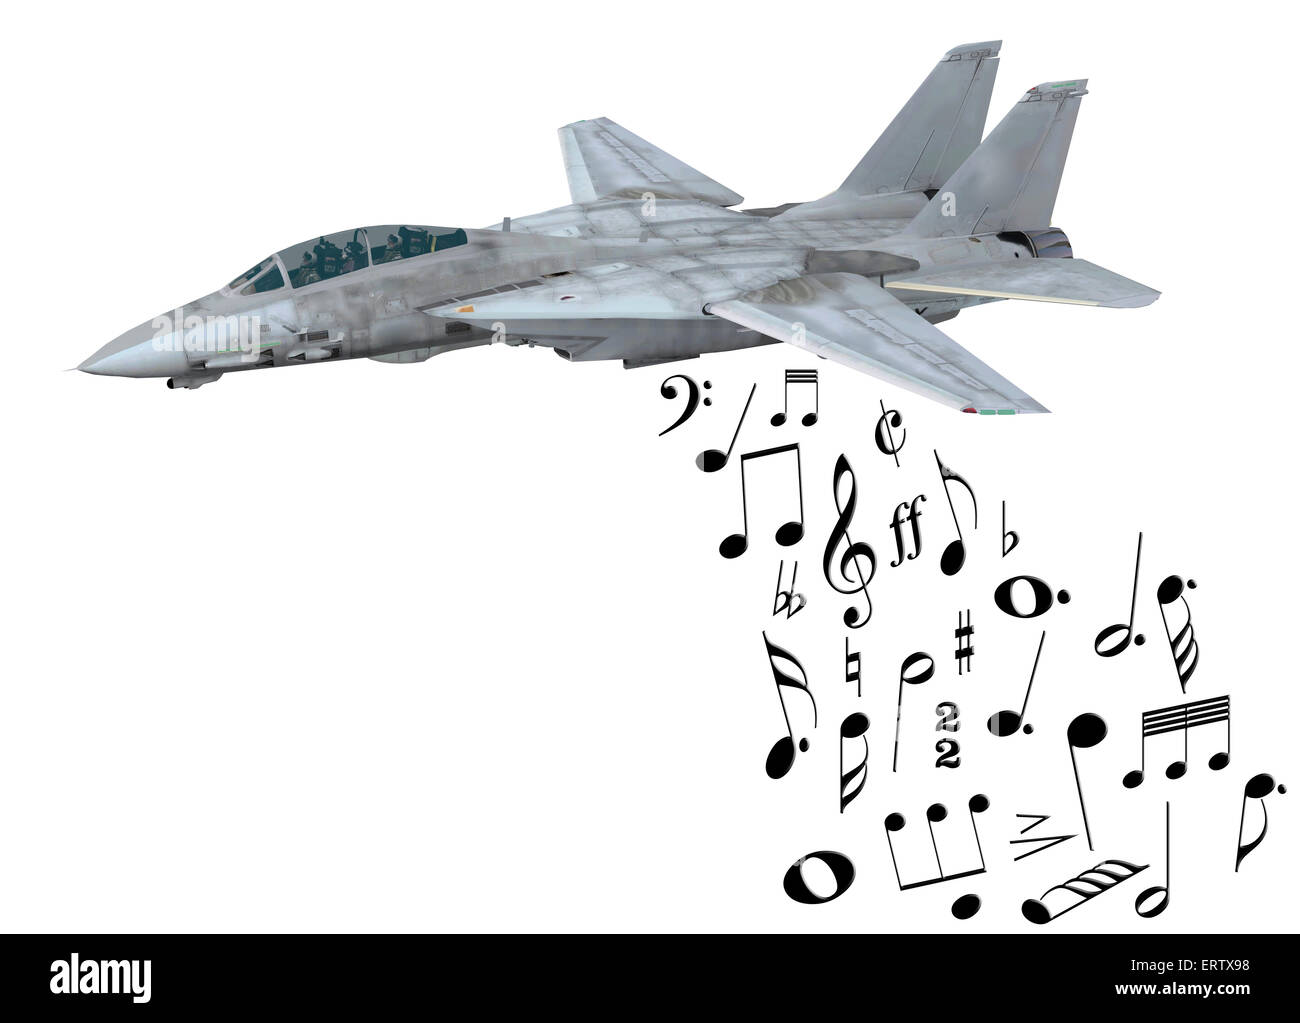 warplane launching musical notes instead of bombs, 3d illustration Stock Photo